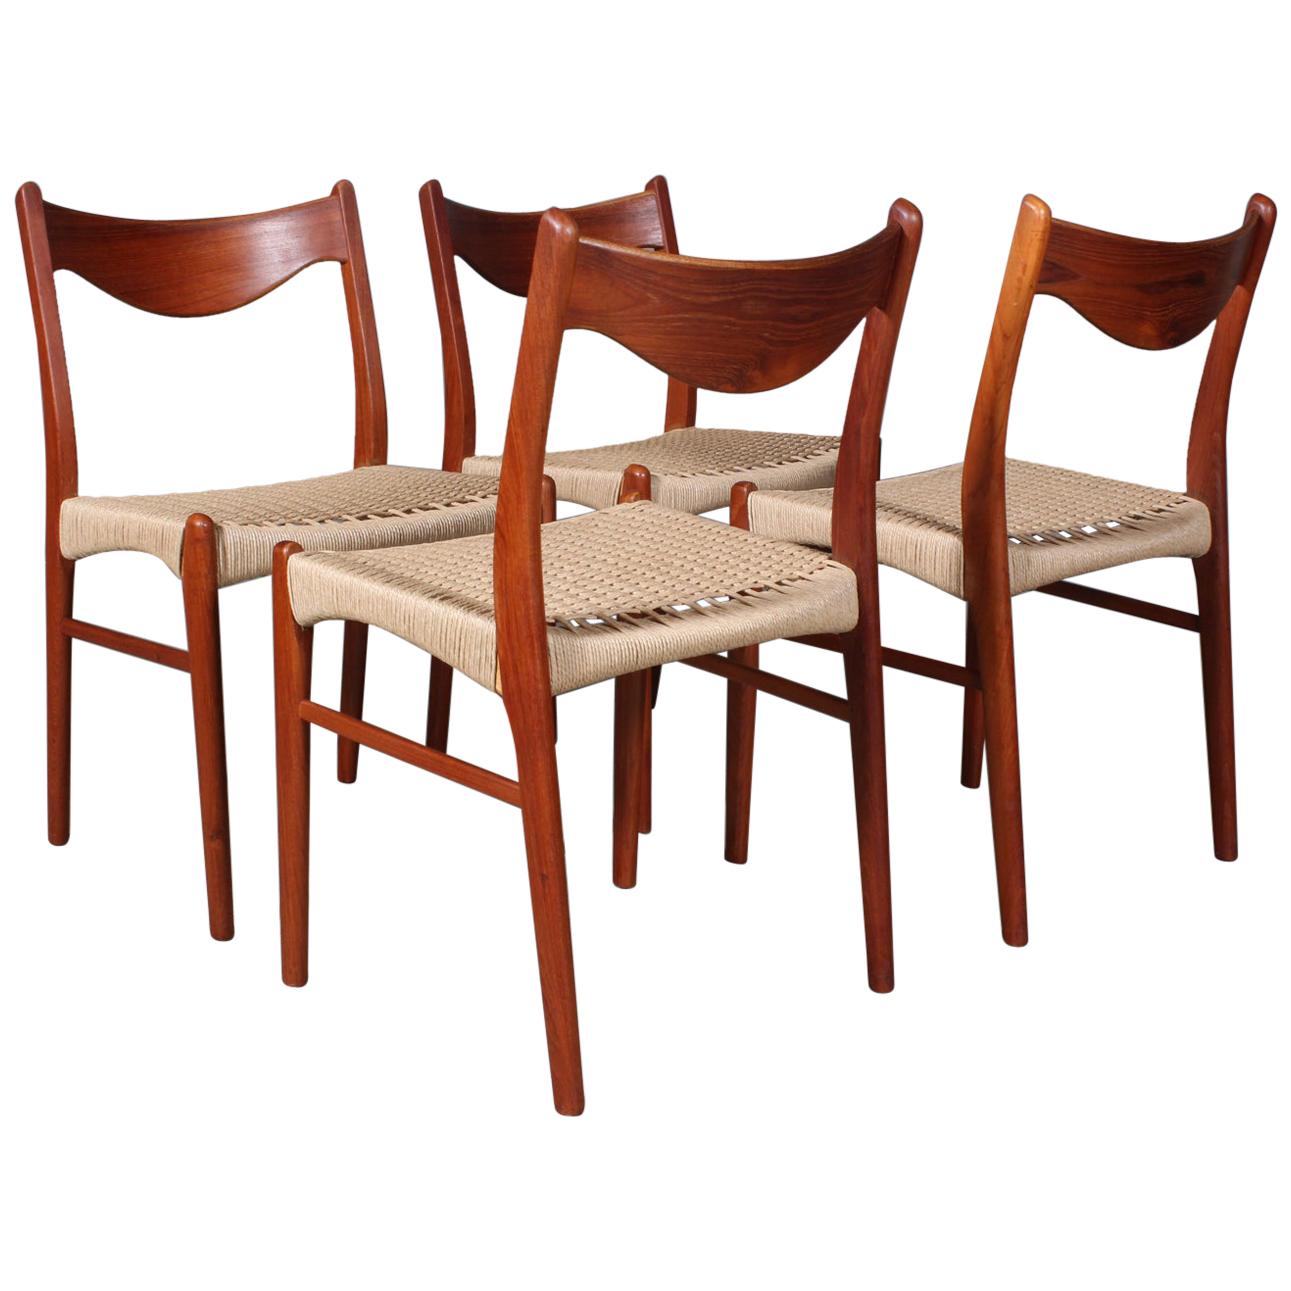 Set of 4 Arne Wahl Dining Chairs